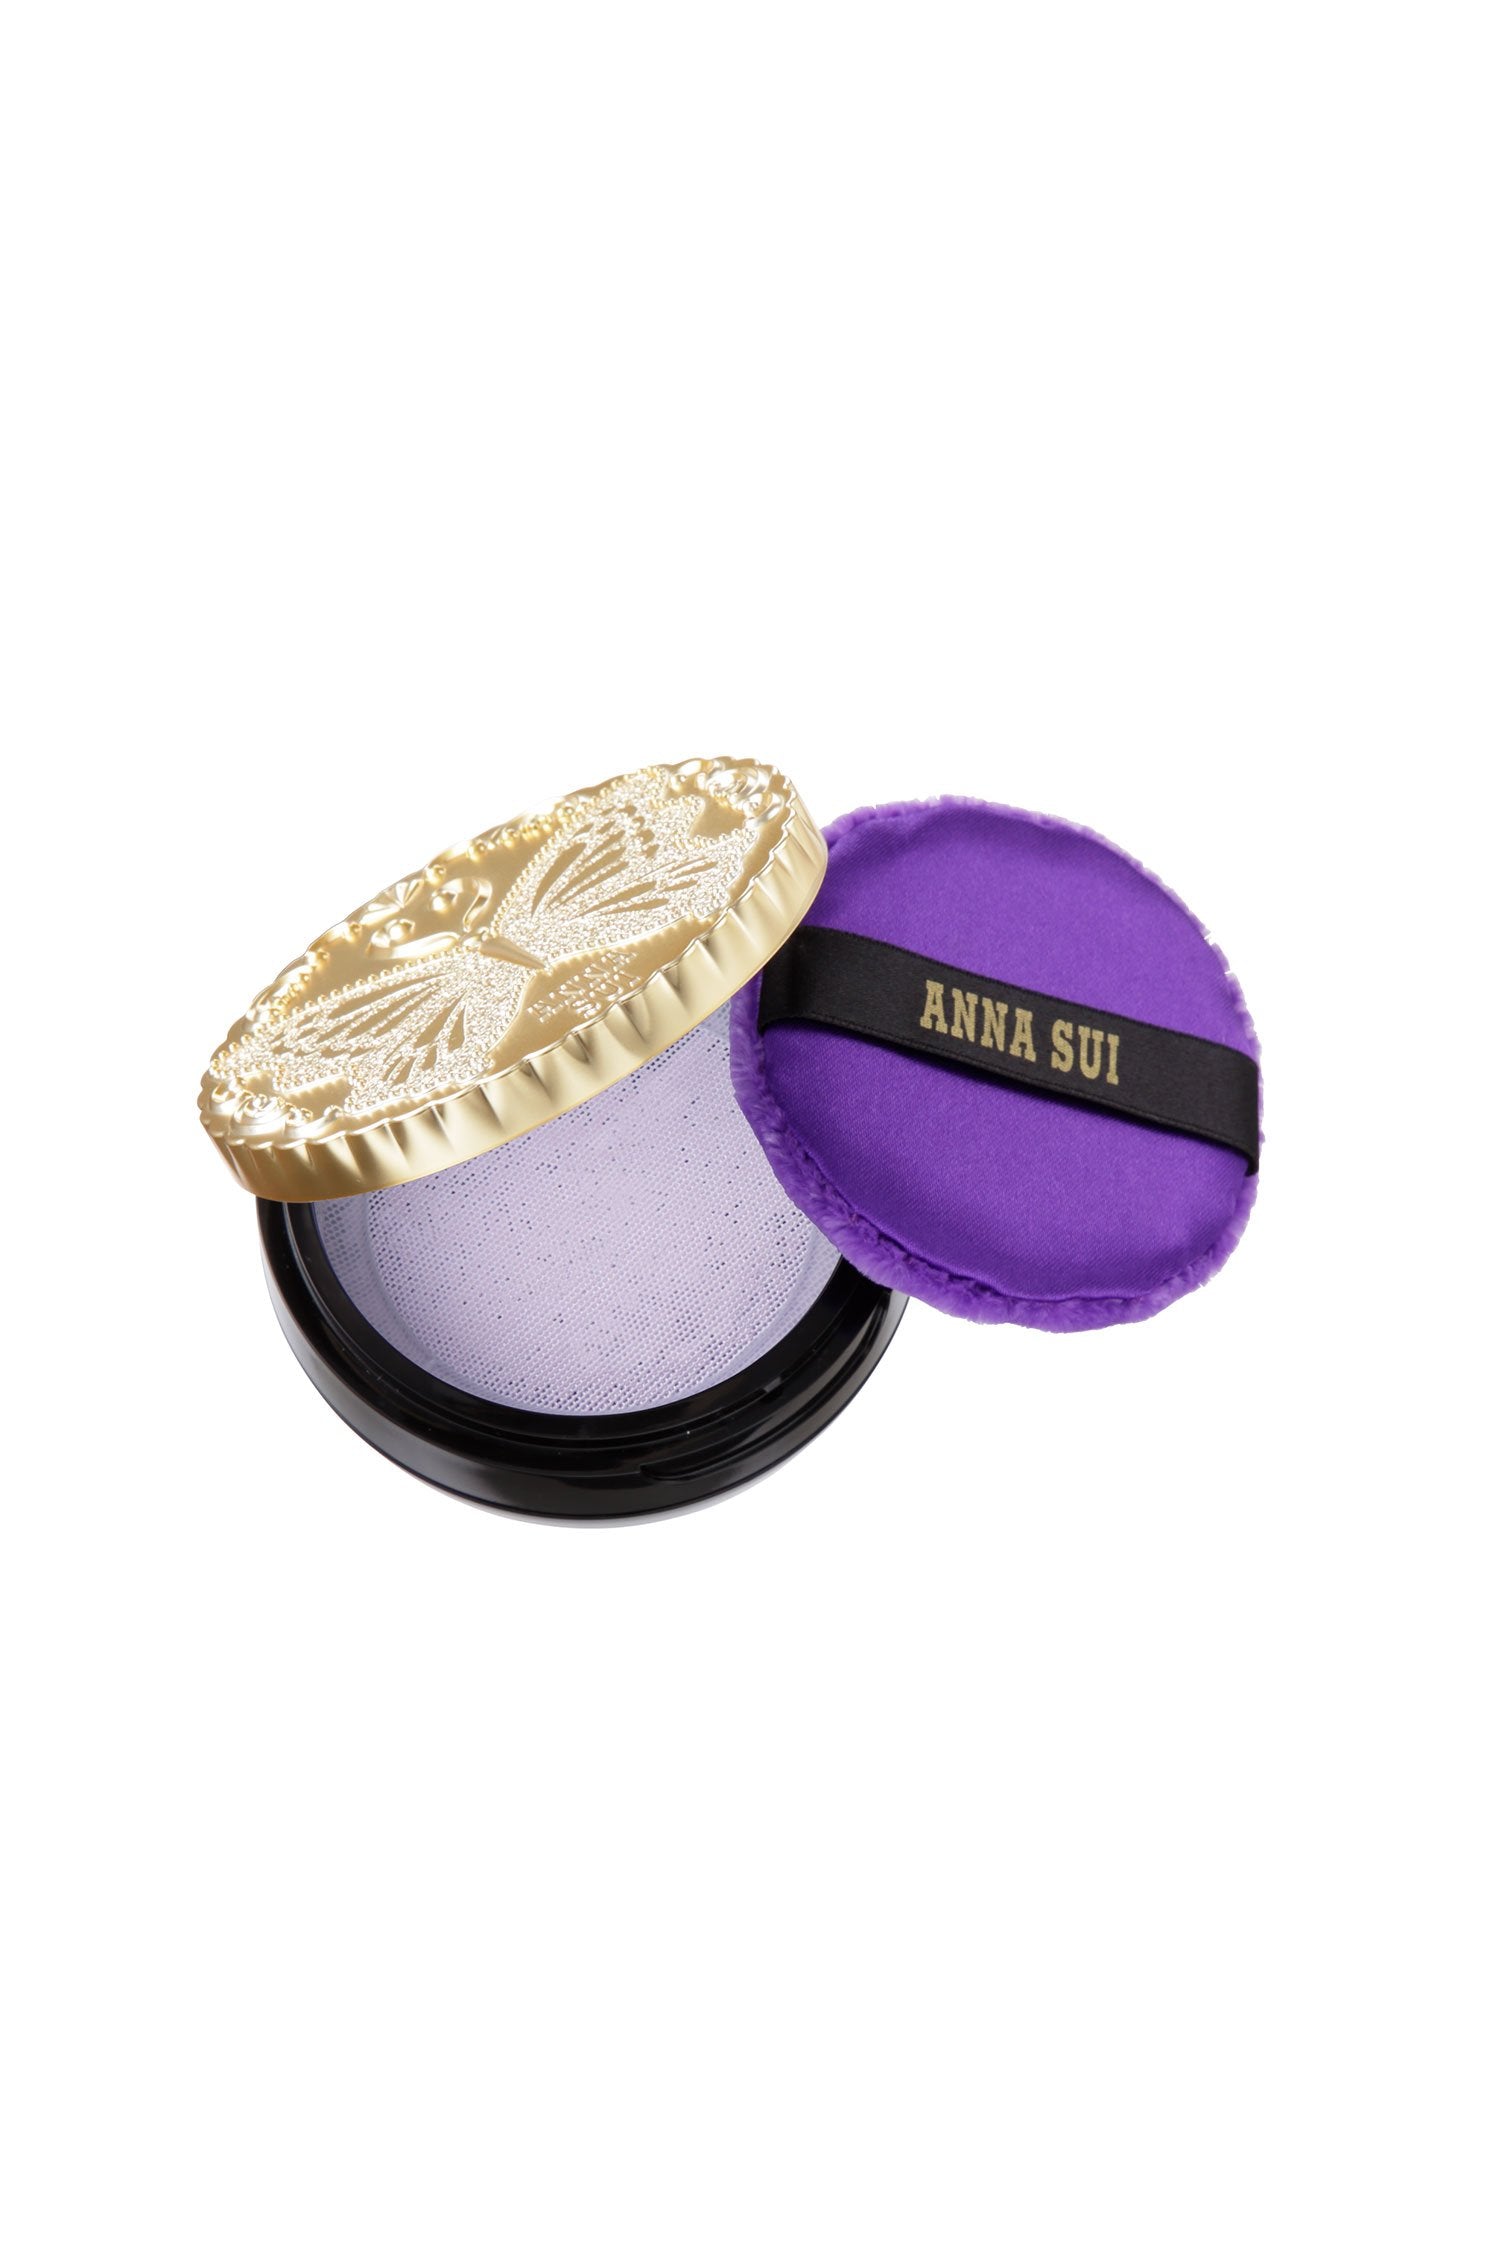 Mini Loose LIGHT PURPLE Powder Set, round black case, with a golden lid with engraved butterfly on top, and a purple pad.